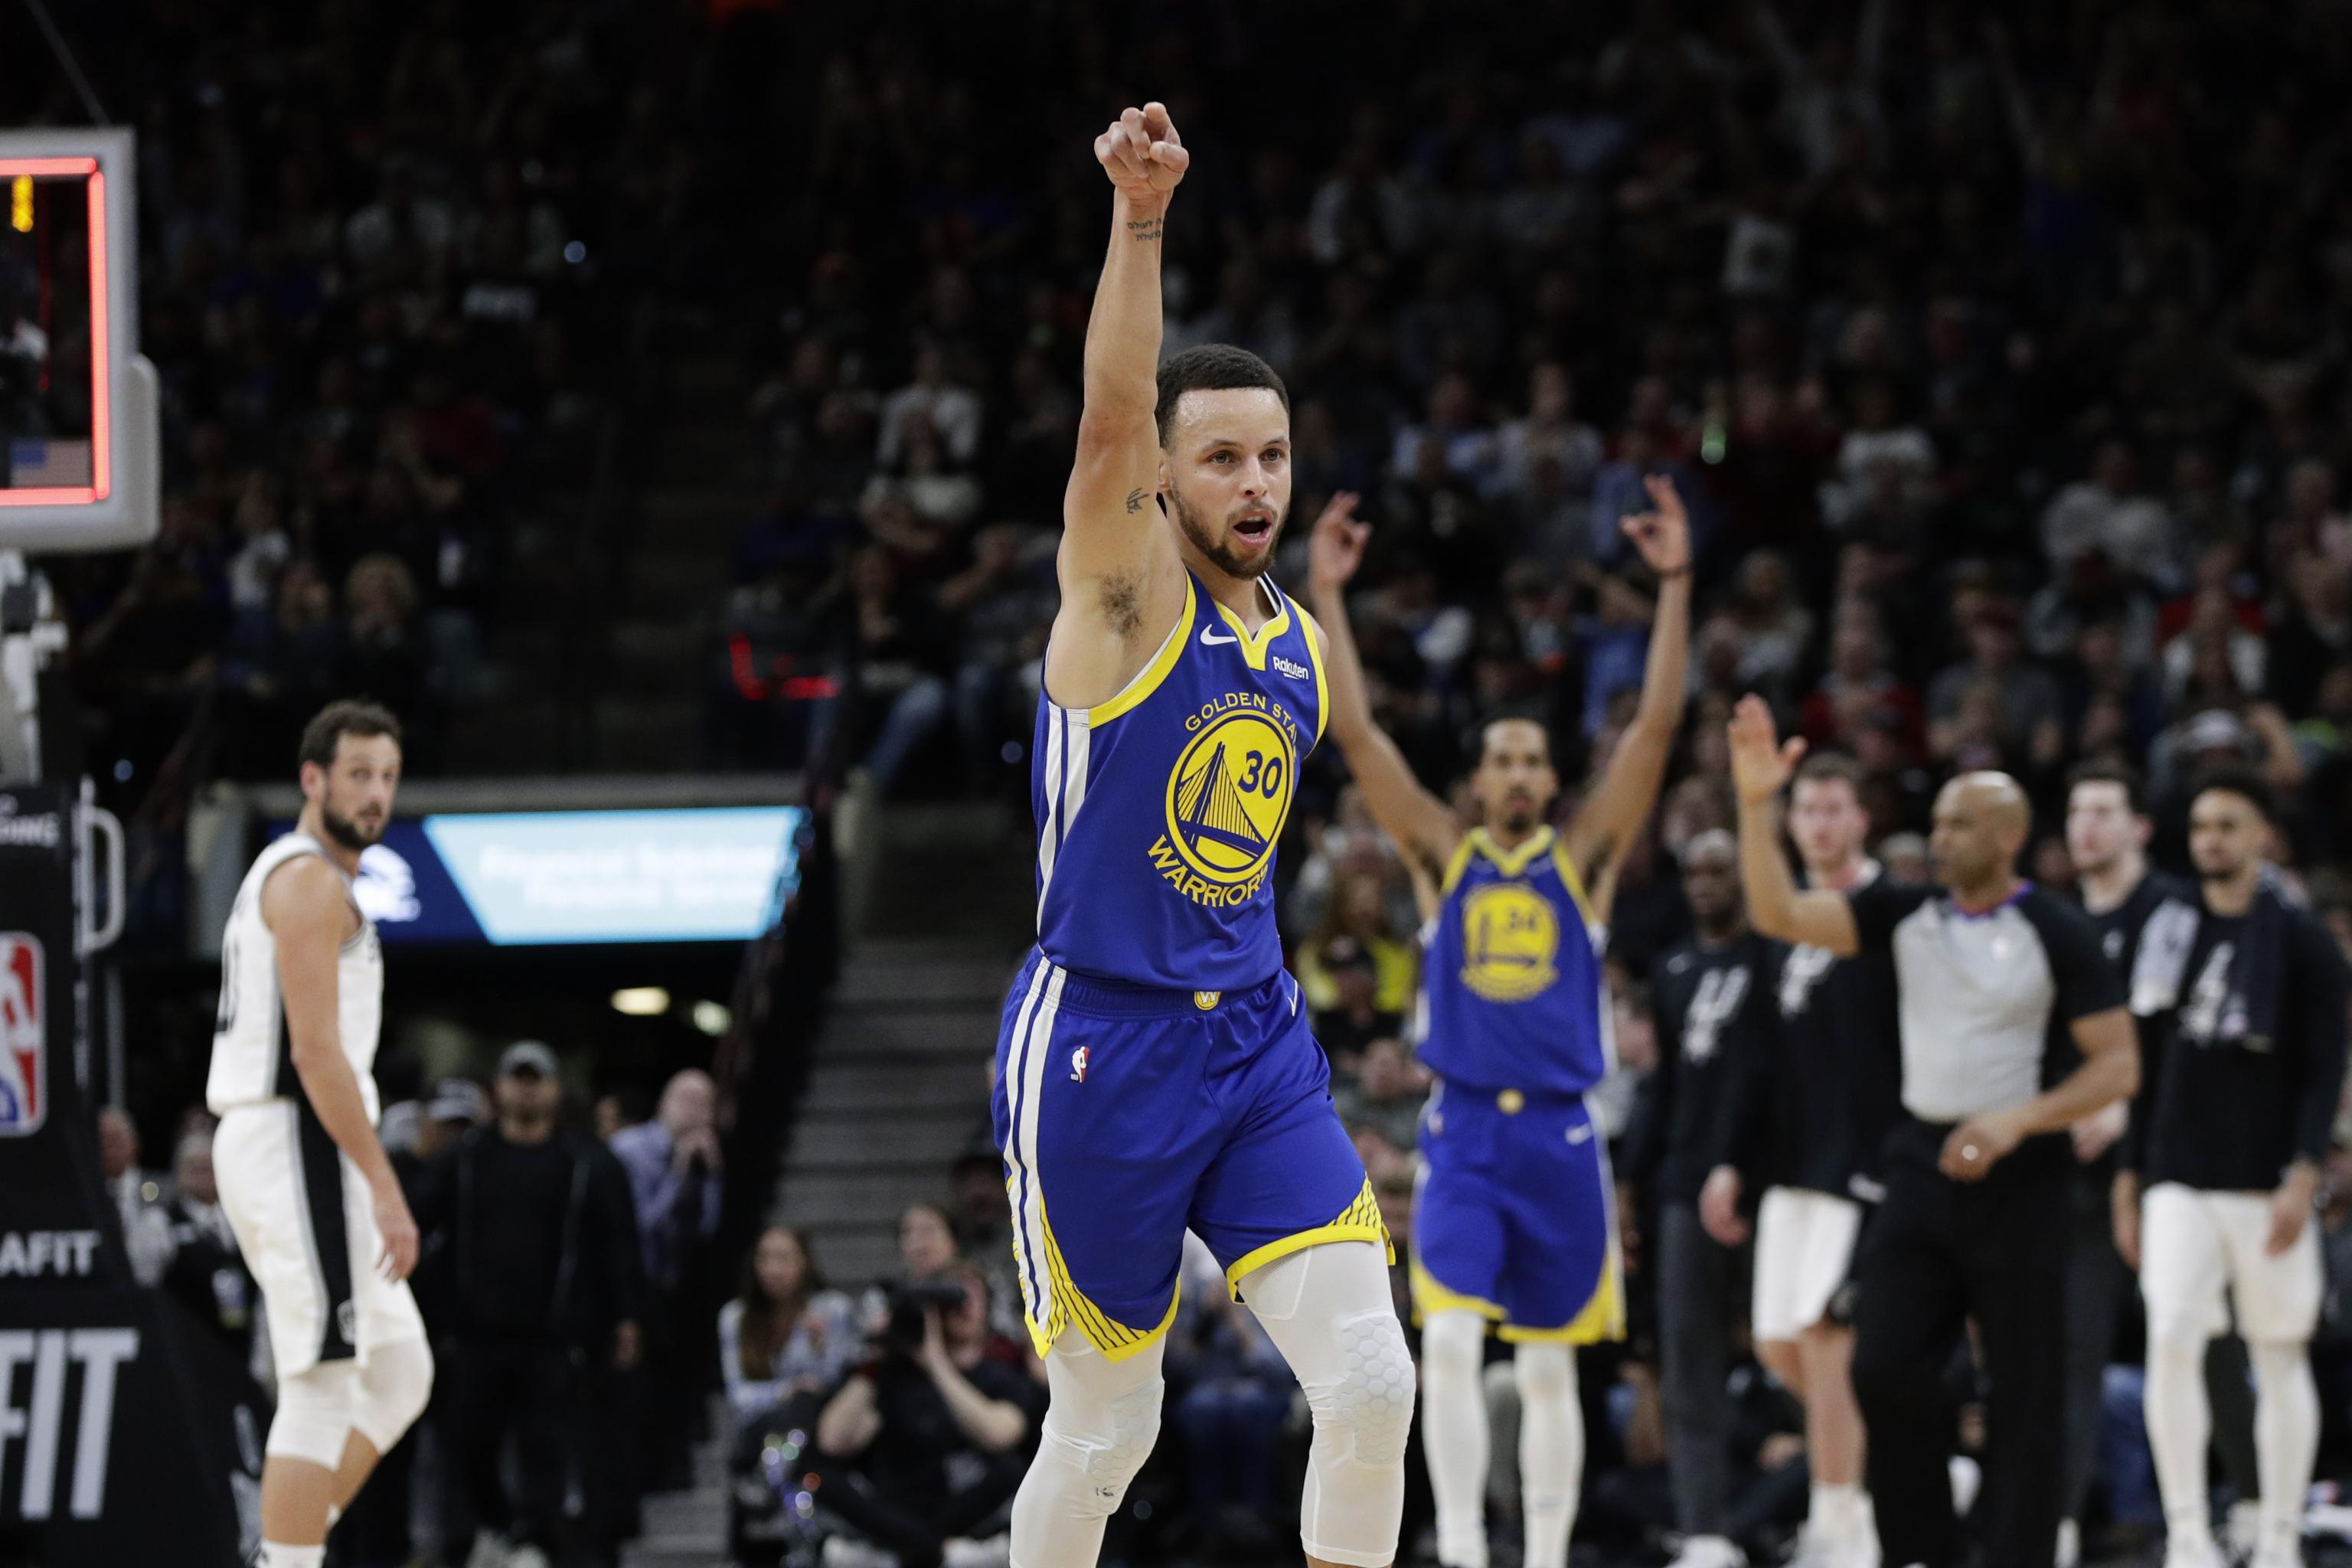 Watch: Steph Curry shows off smooth crossover to get open 3-pointer vs.  Spurs